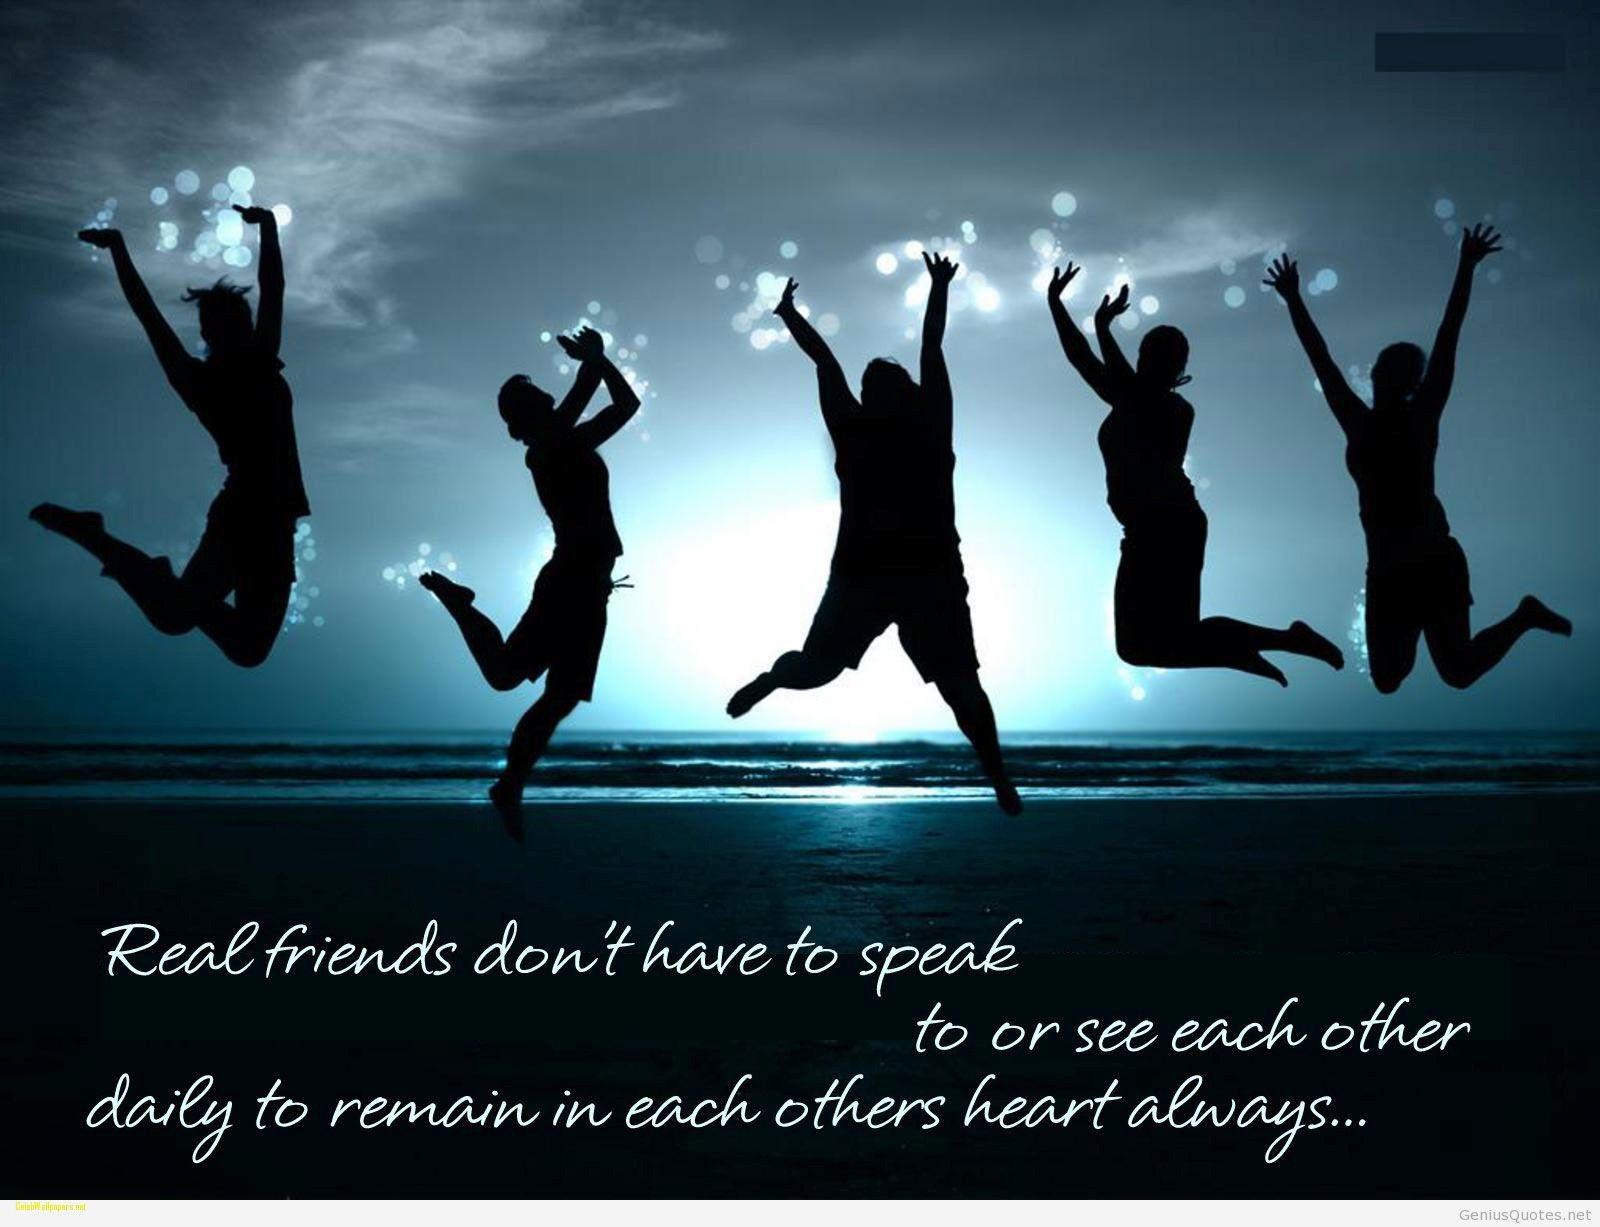 Best Friends forever Quotes Image and Friends Wallpaper Beautiful